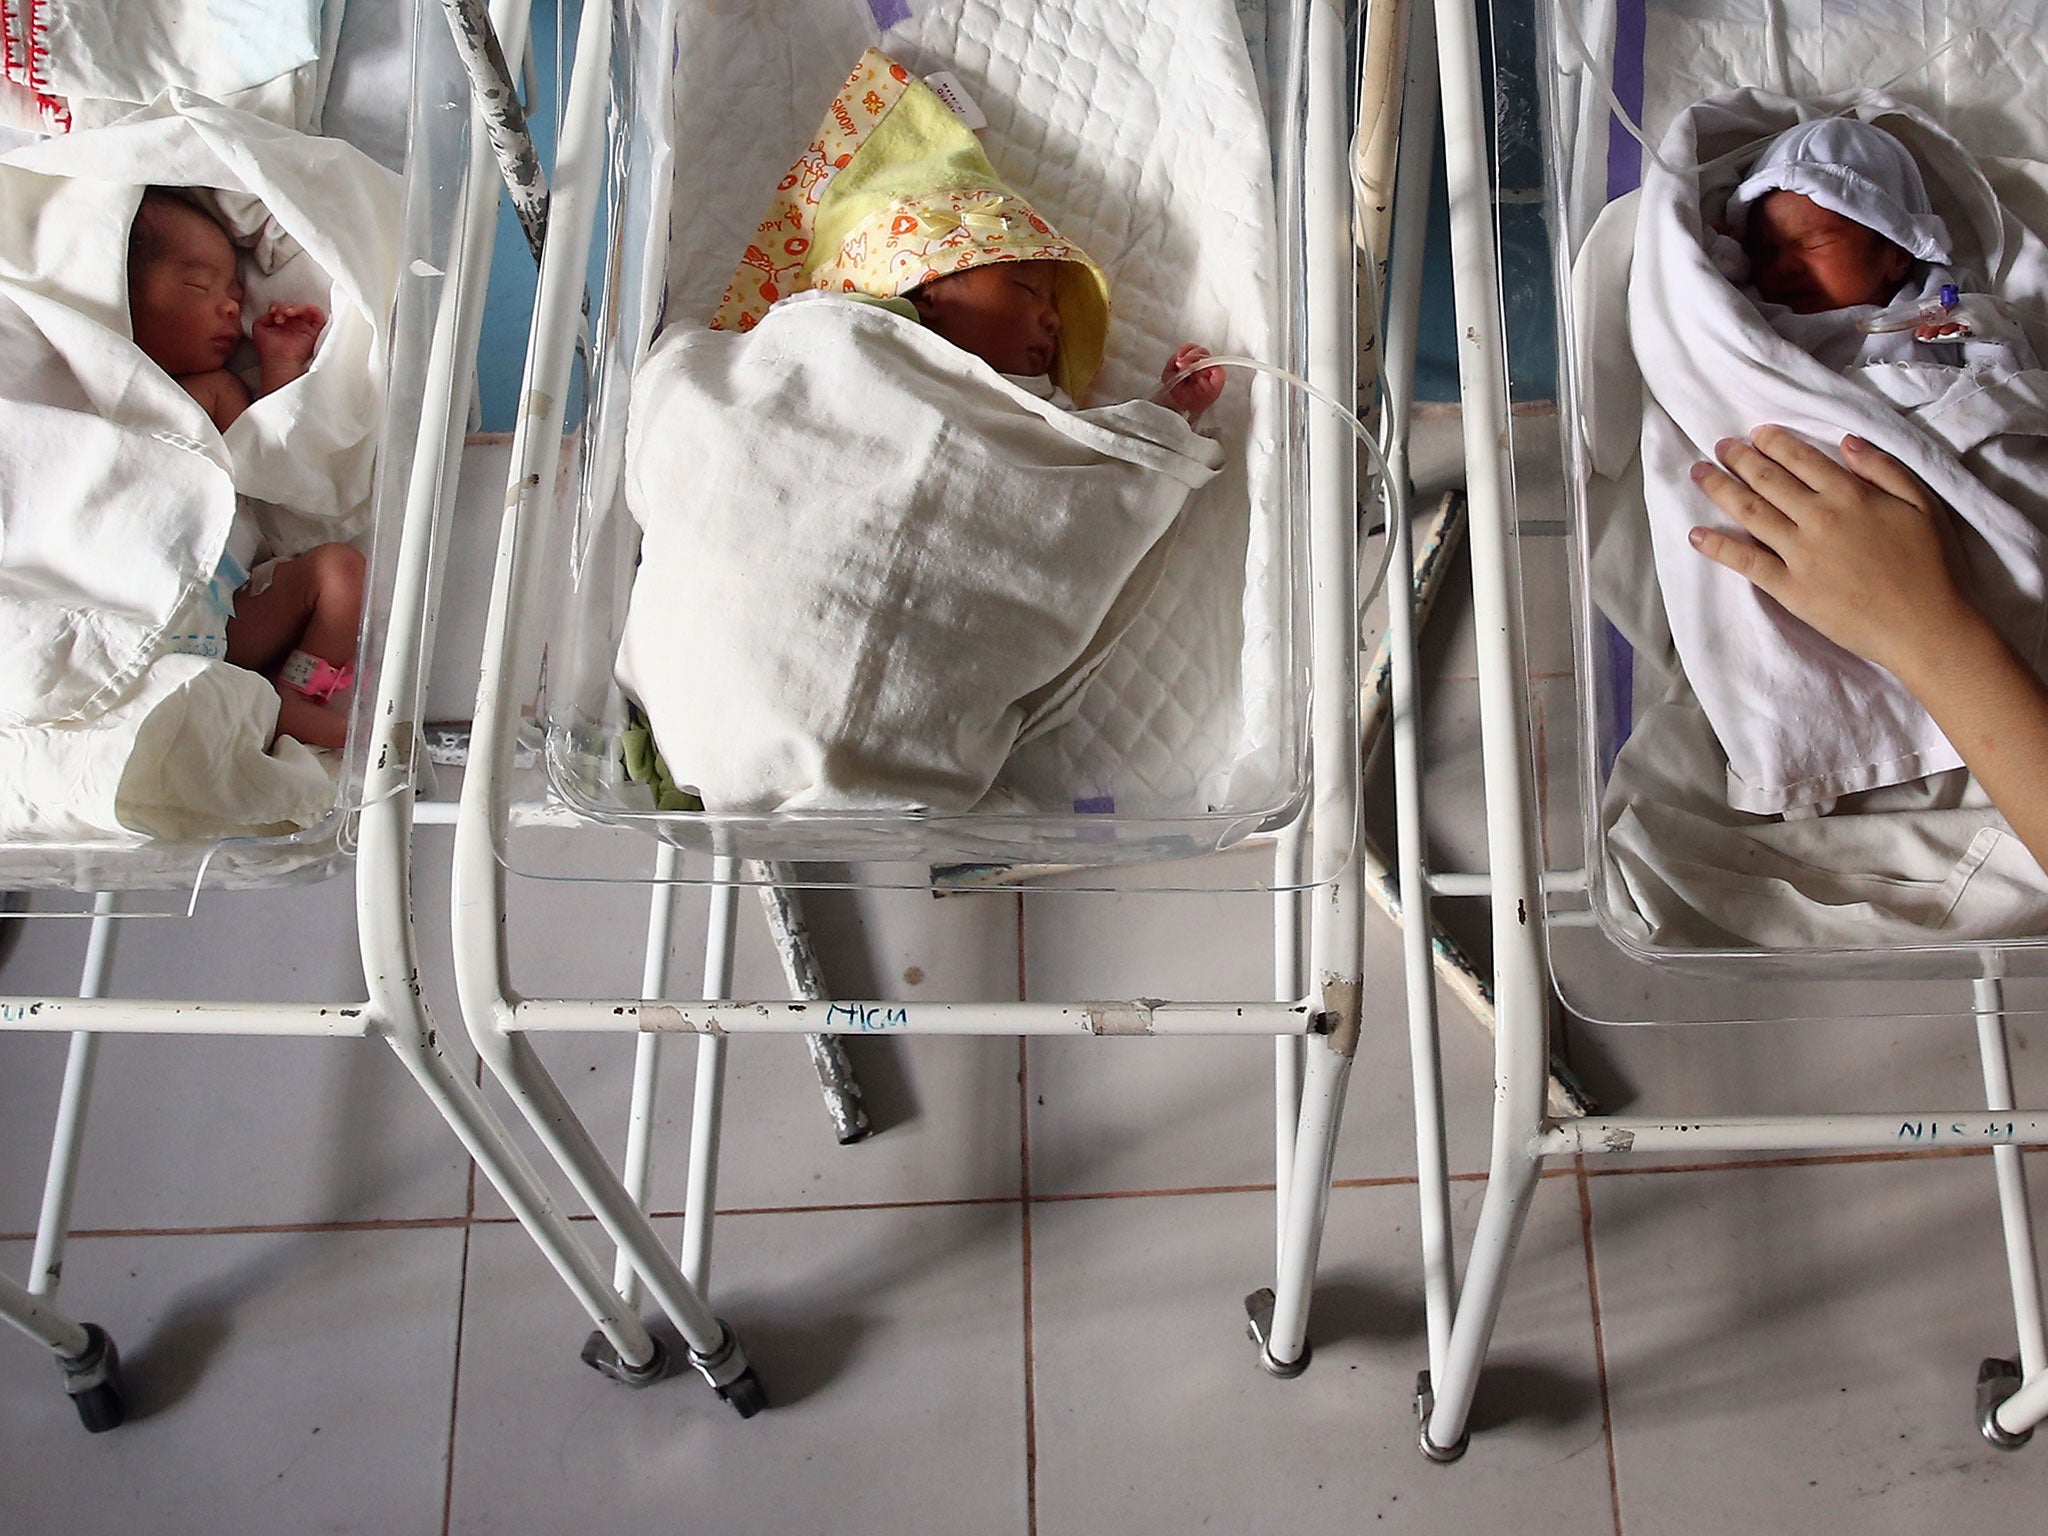 Newborn babies will be screened for four rare life-threatening genetic disorders